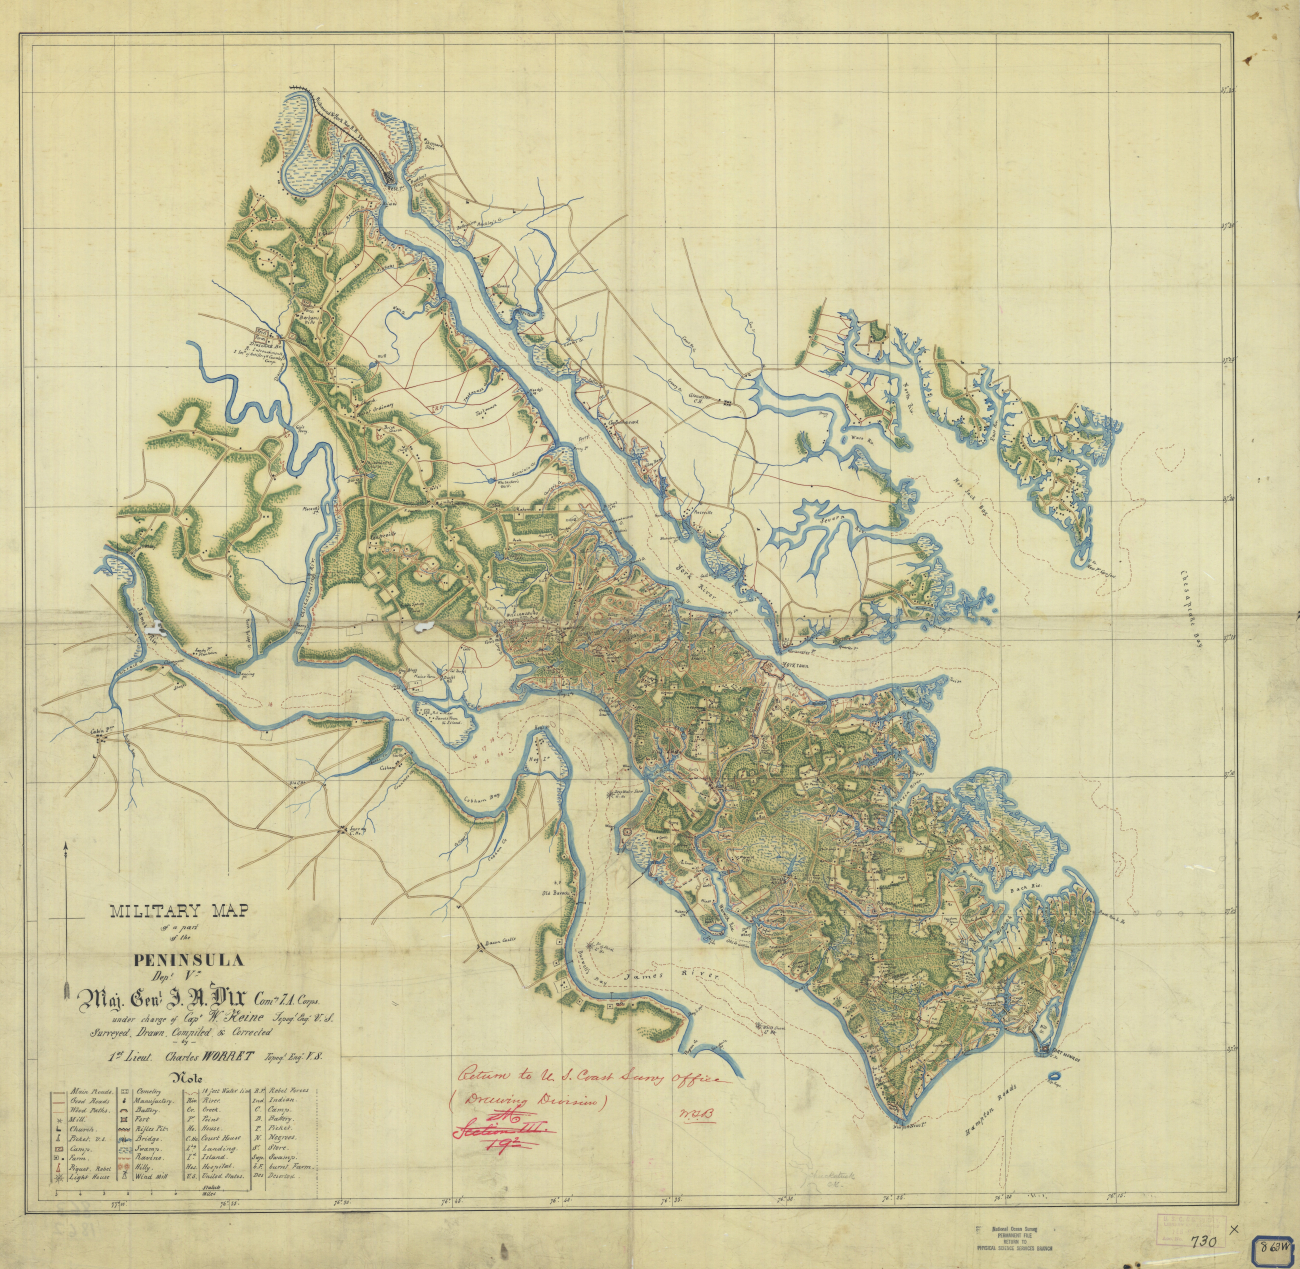 Military Map of the Peninsula Surveyed, Drawn, Compiled, and Corrected by1st Lieut